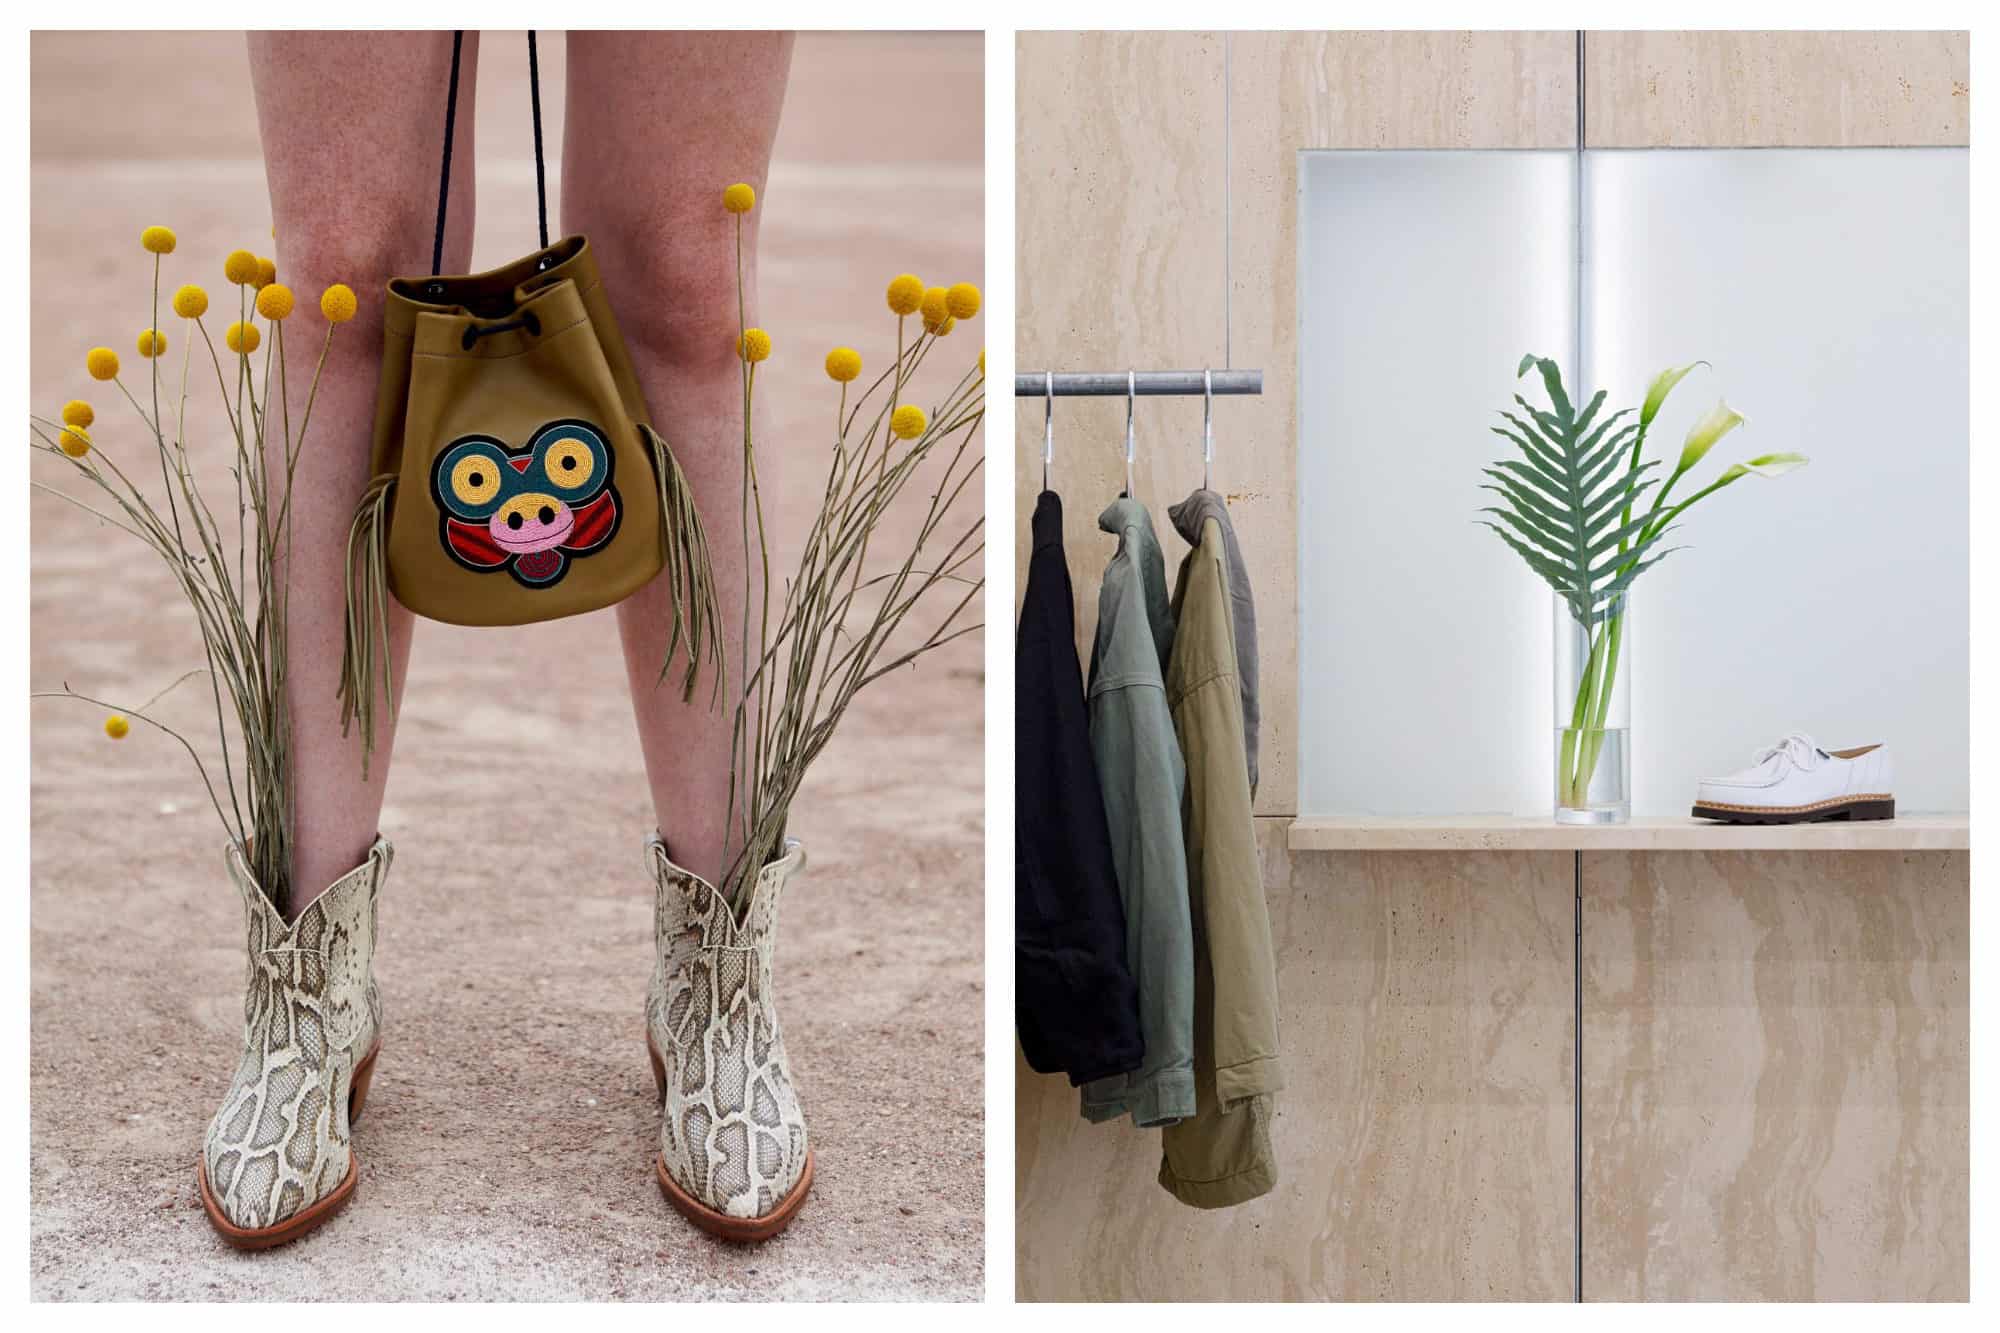 The legs of a woman wearing snaskin boots with dried yellow flowers planted inside them, carrying a bag between her knees (left) by Macon & Lesquoy on the Canal Saint Martin in Paris. A selection of jackets and shoes arranged inside the pared-down The Next Door store (right).